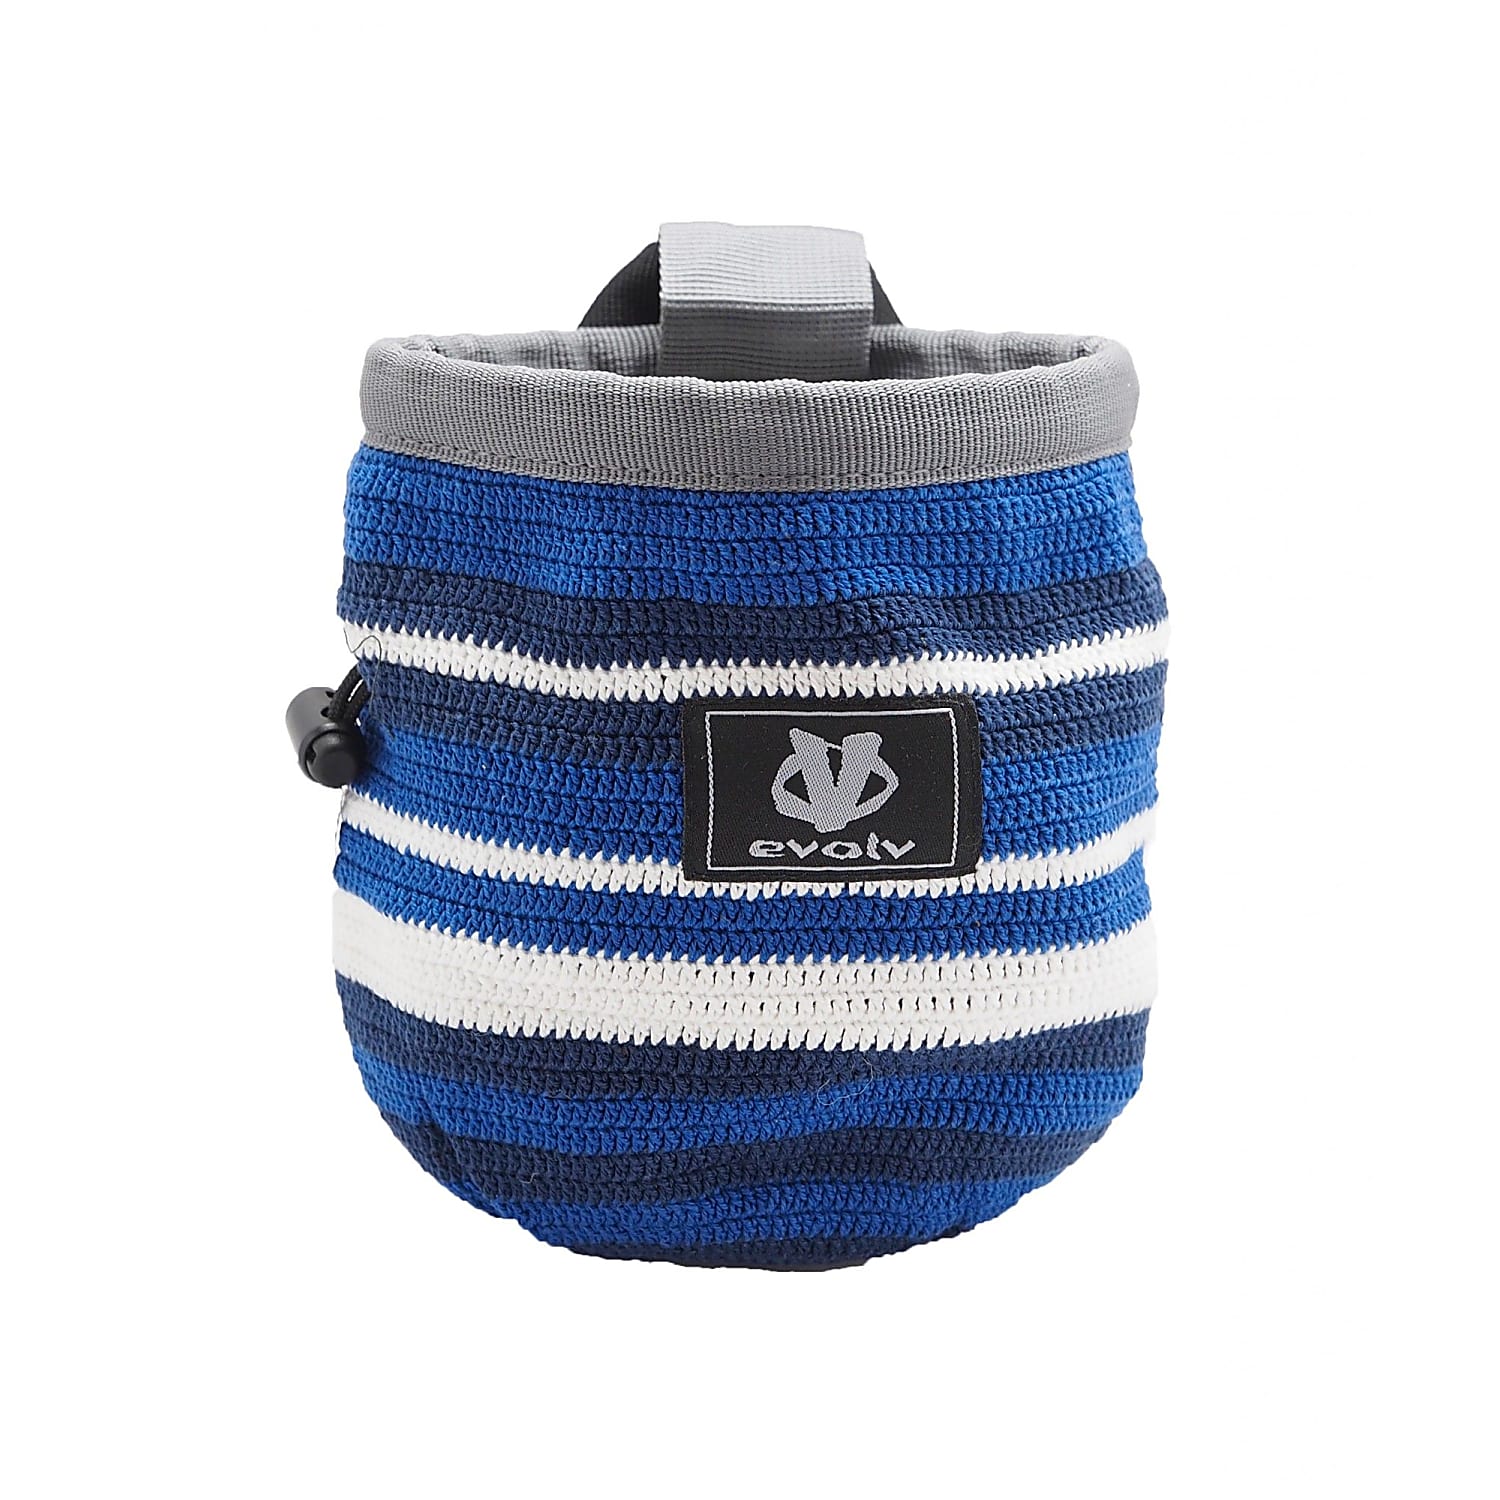 Evolv Collectors Chalk Bag  Outdoor Clothing & Gear For Skiing